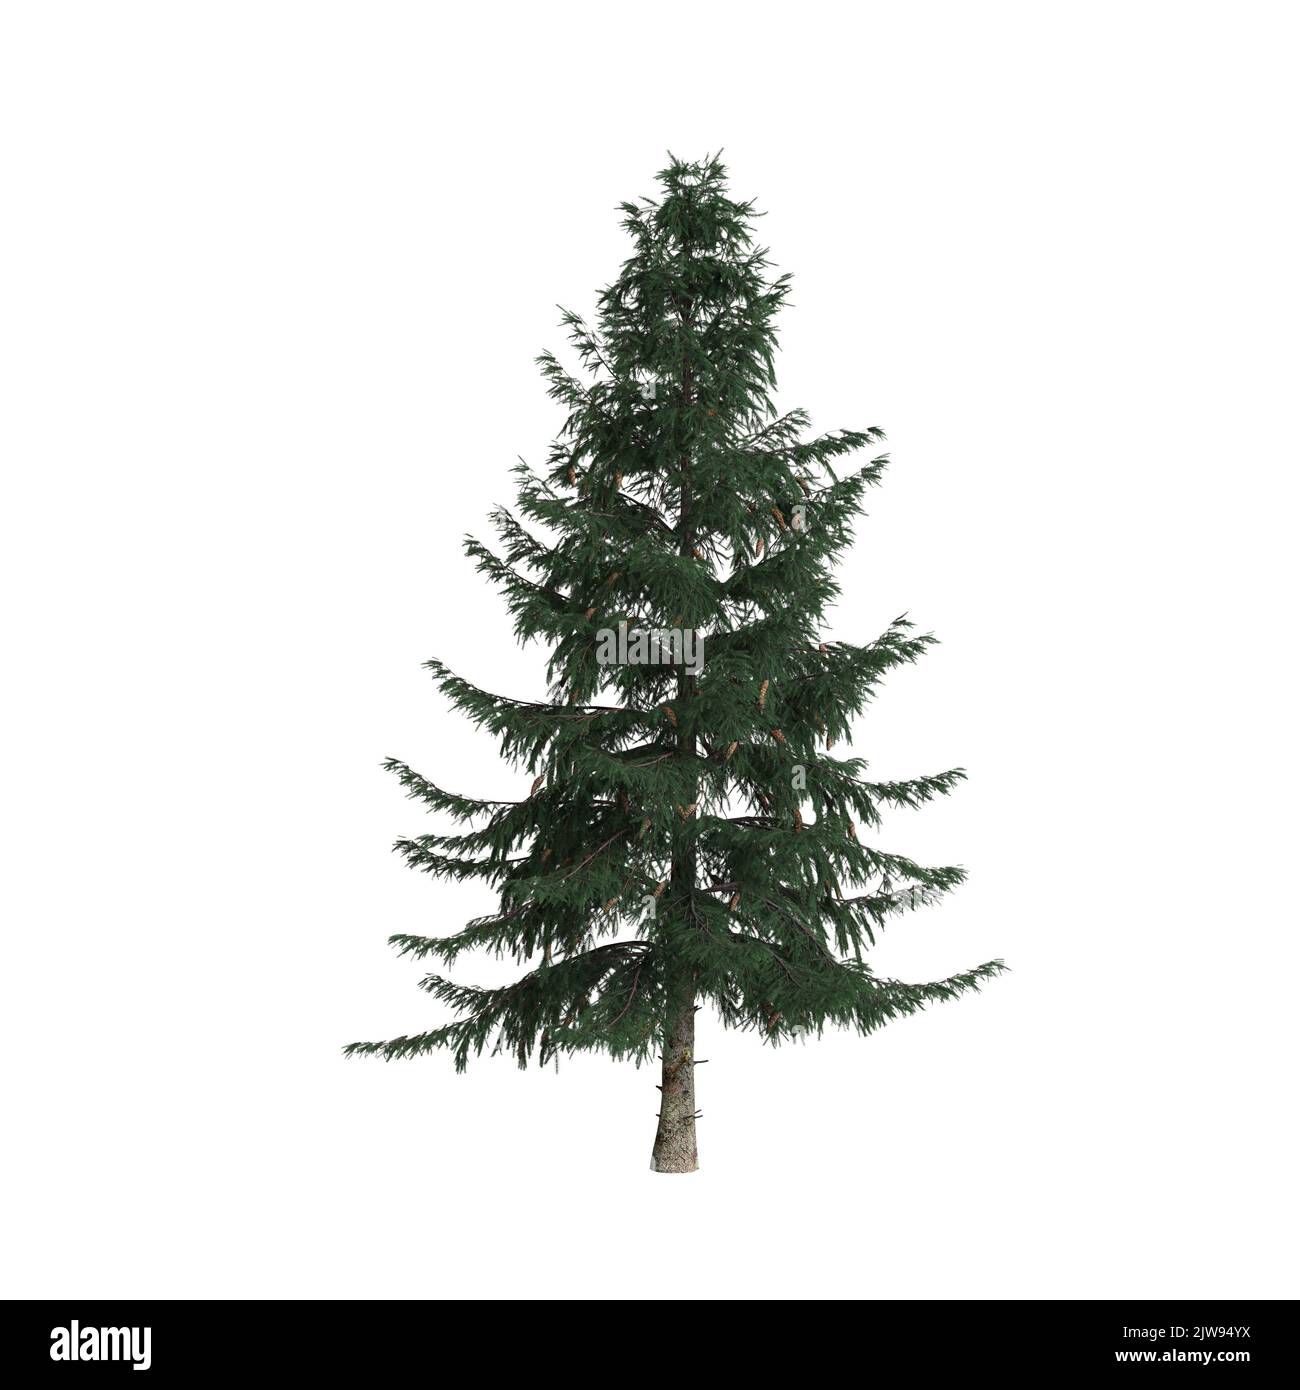 3d illustration of picea abies tree isolated on white background Stock Photo